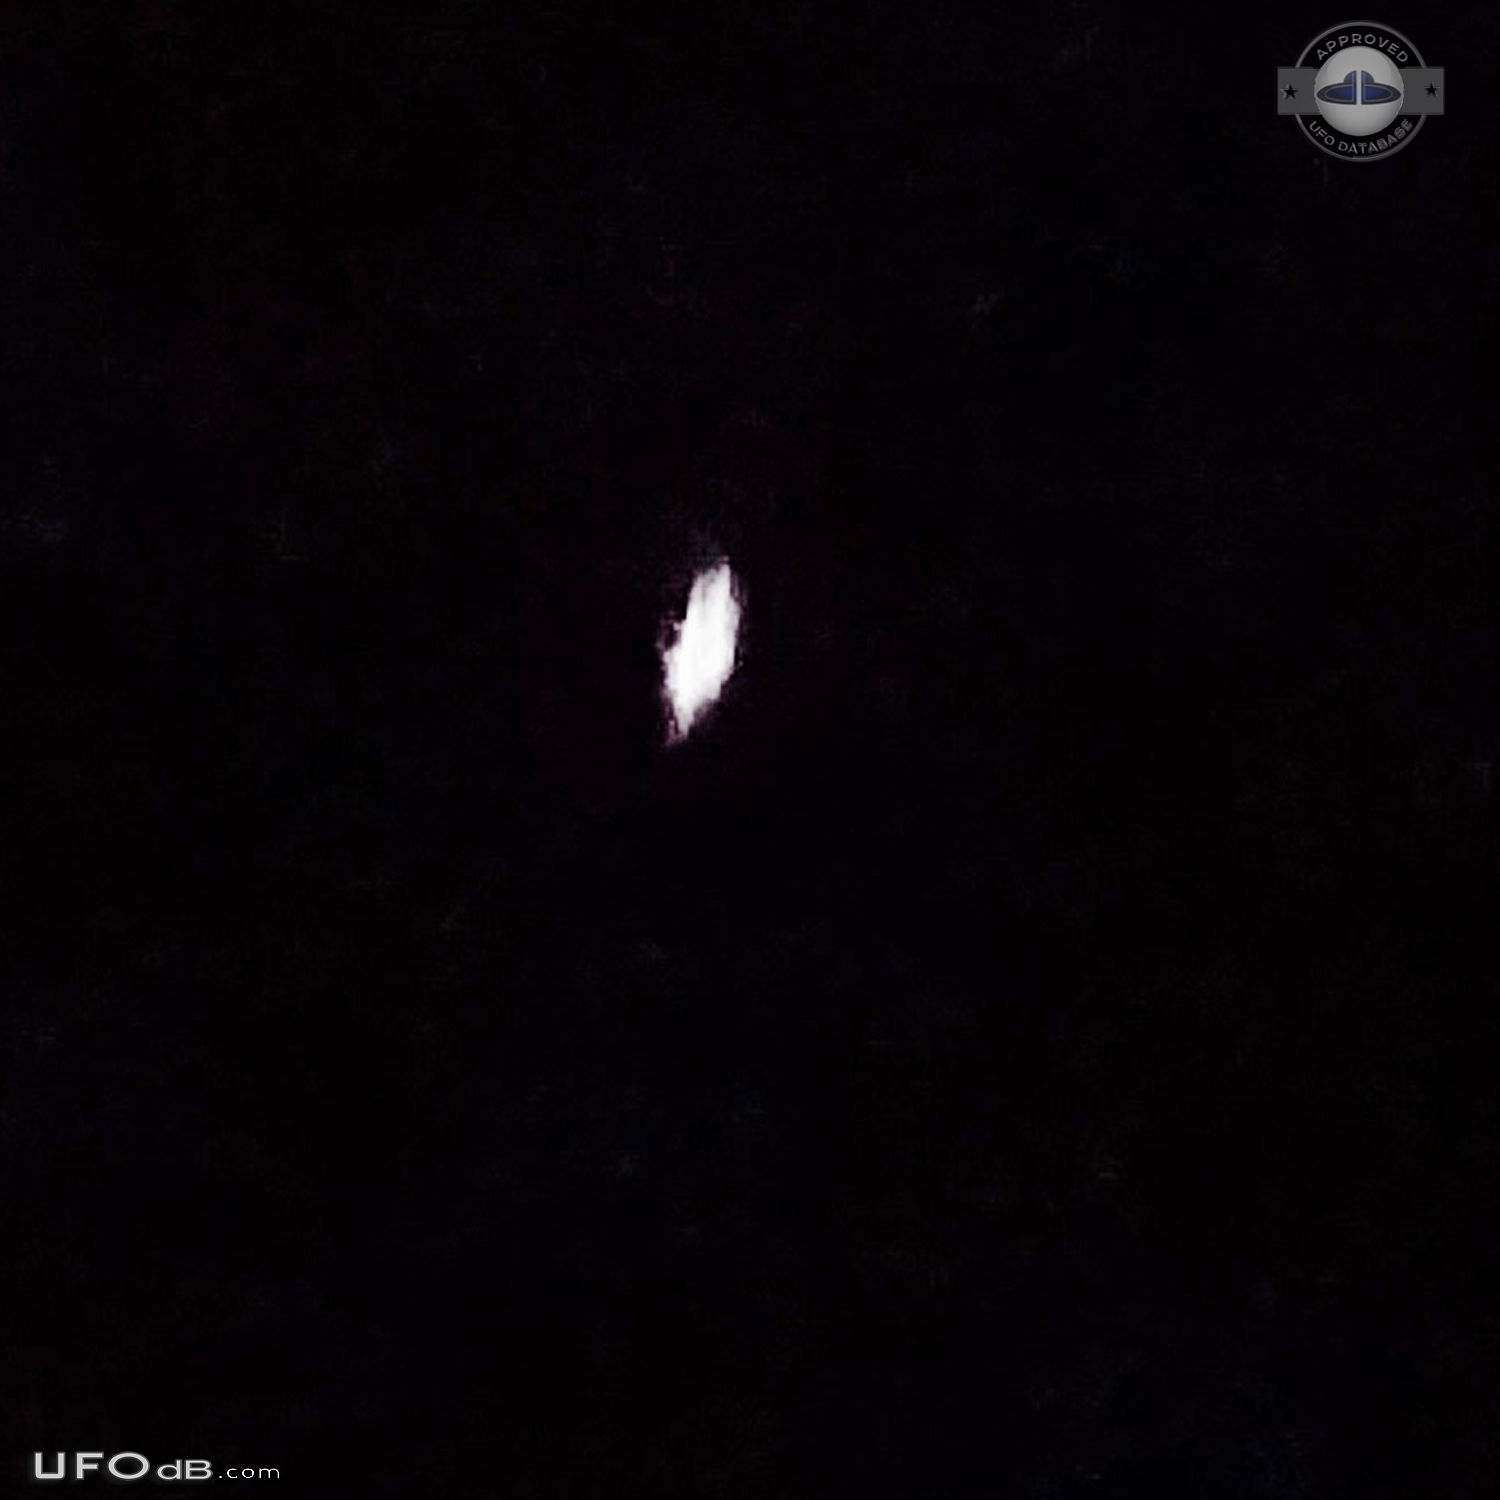 Seen from distance unmoving much larger other stars - Gatineau Quebec  UFO Picture #767-5